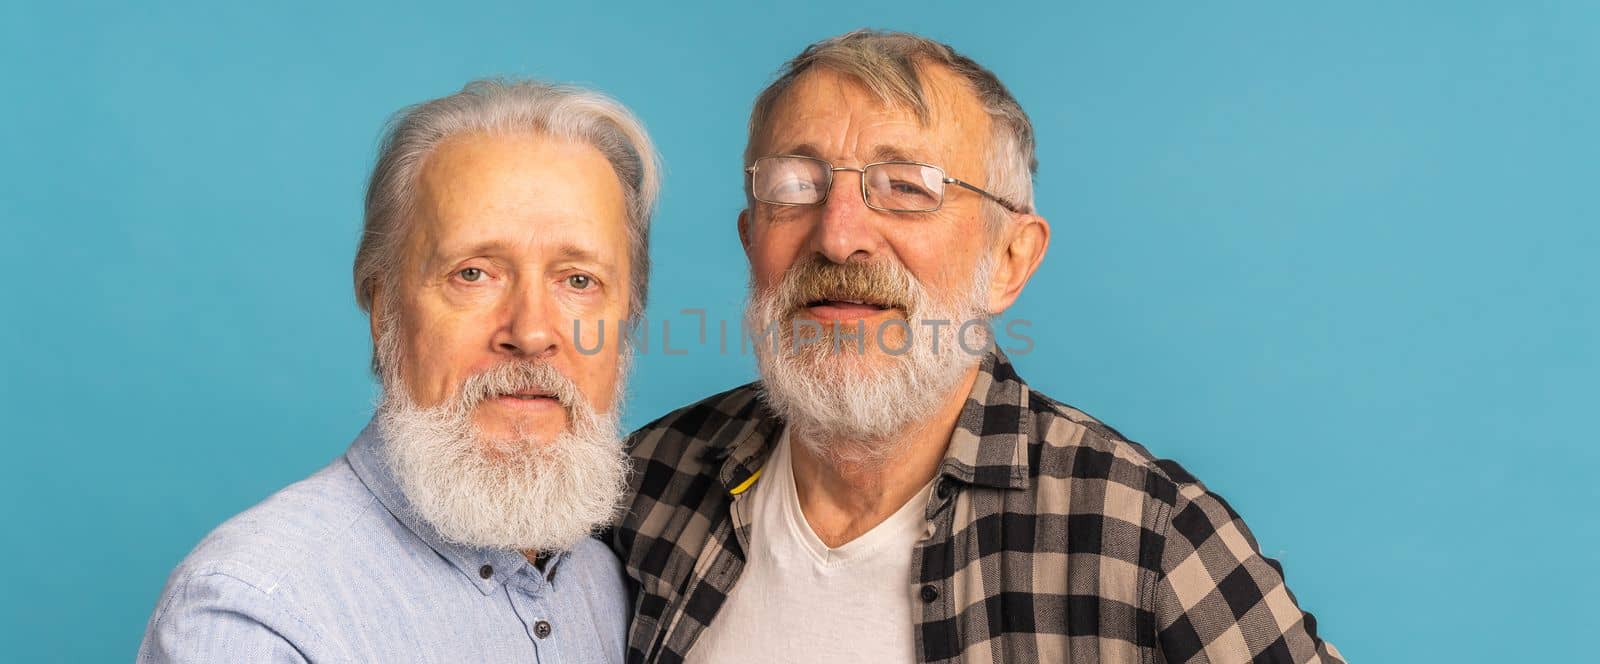 Banner portrait two elderly man friends standing over blue background - friendship, aged and senior people by Satura86